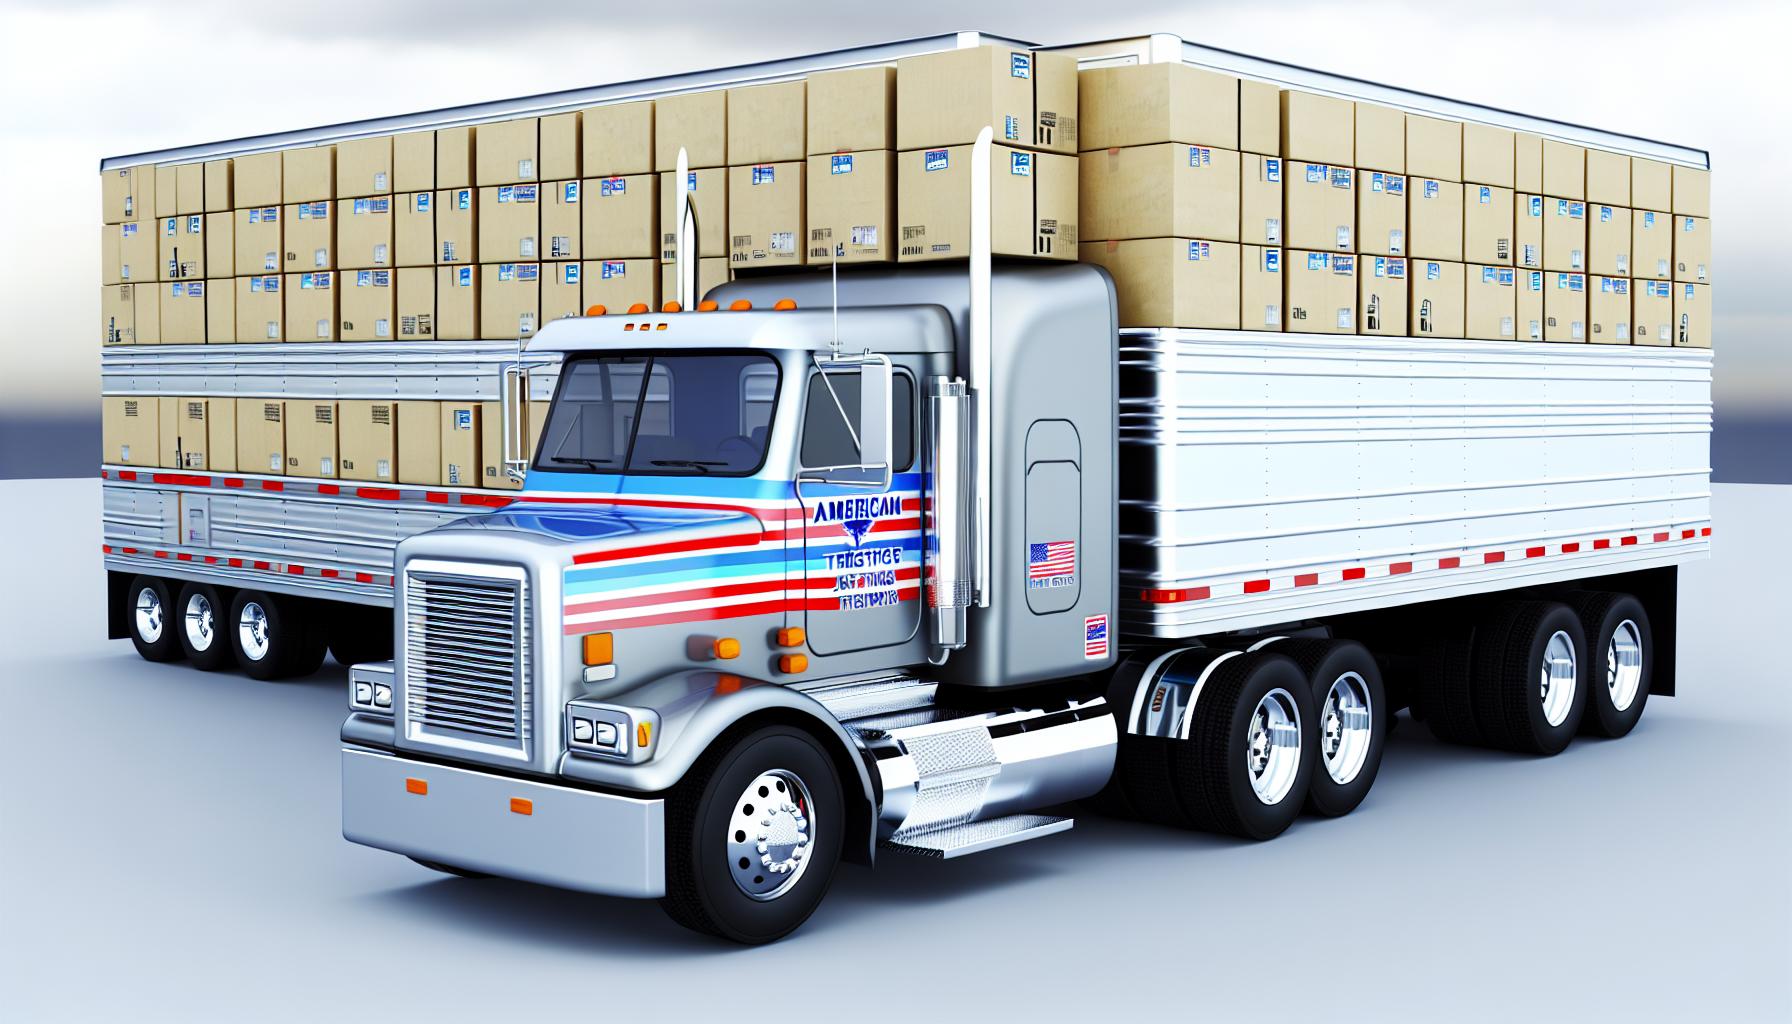 An image of a fully loaded American freight truck for shipping goods